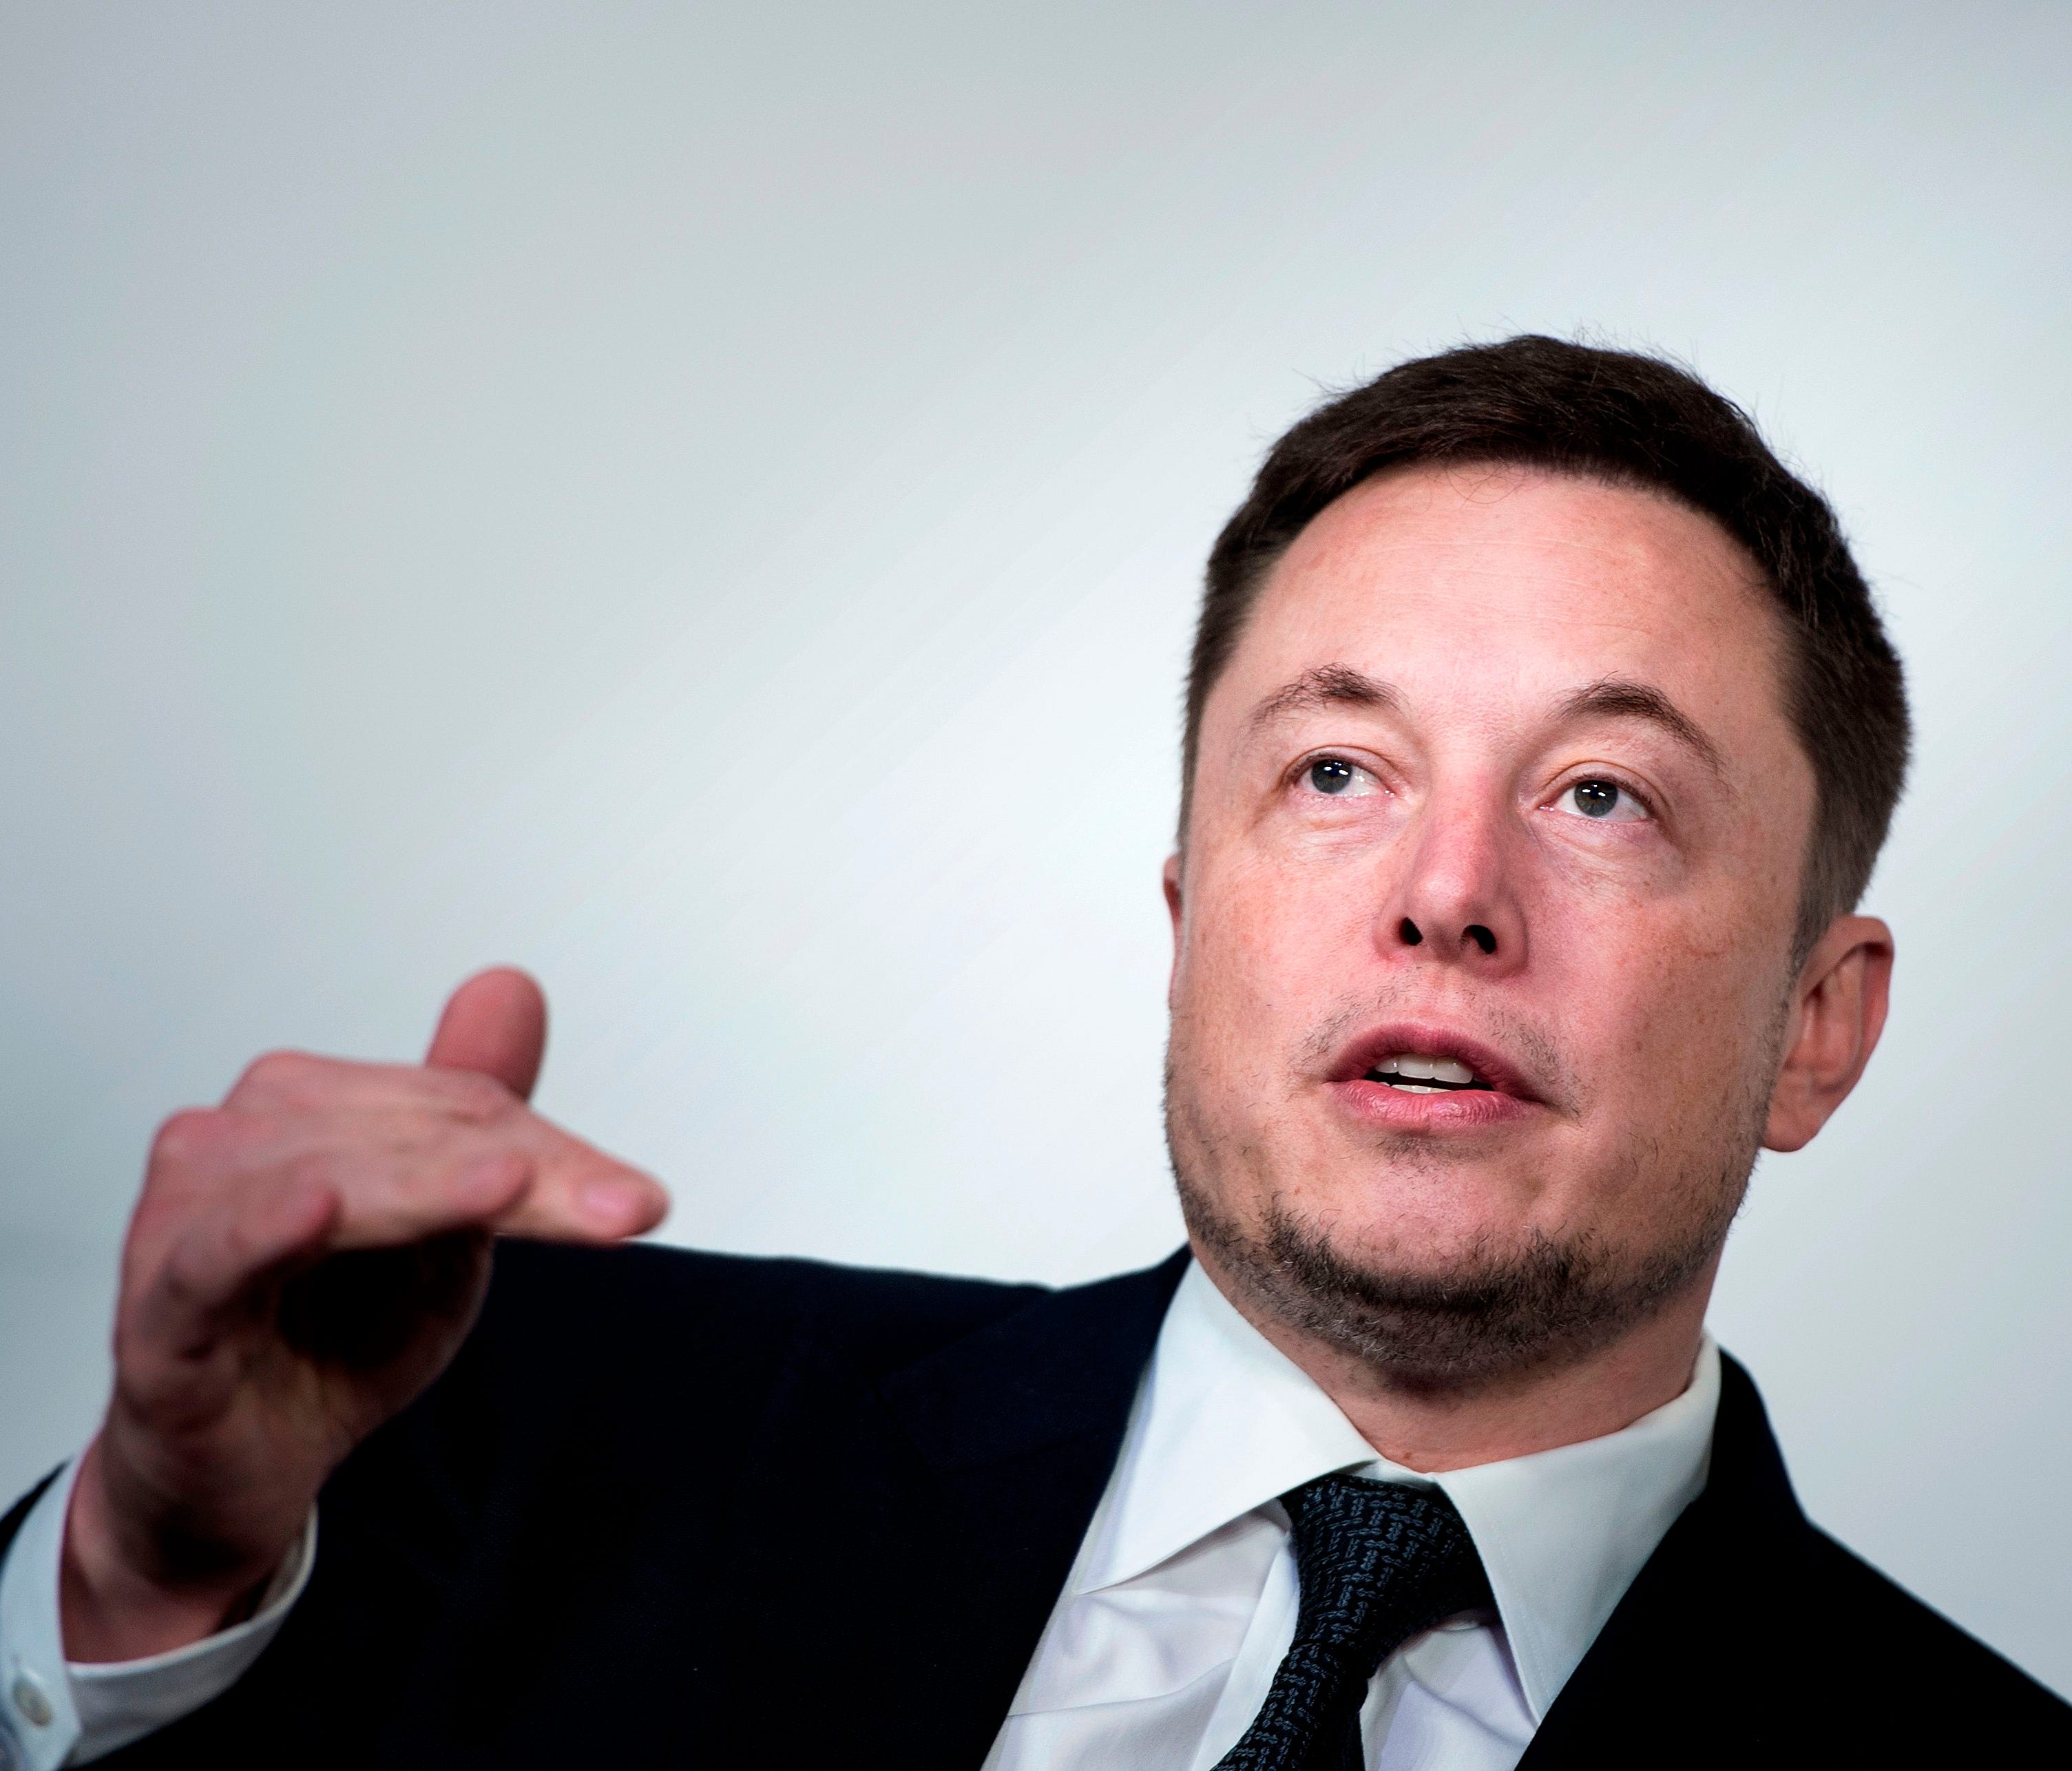 Elon Musk, CEO of SpaceX and Tesla, is facing some backlash after calling a British diver involved in the Thai cave rescue a 'pedo.'